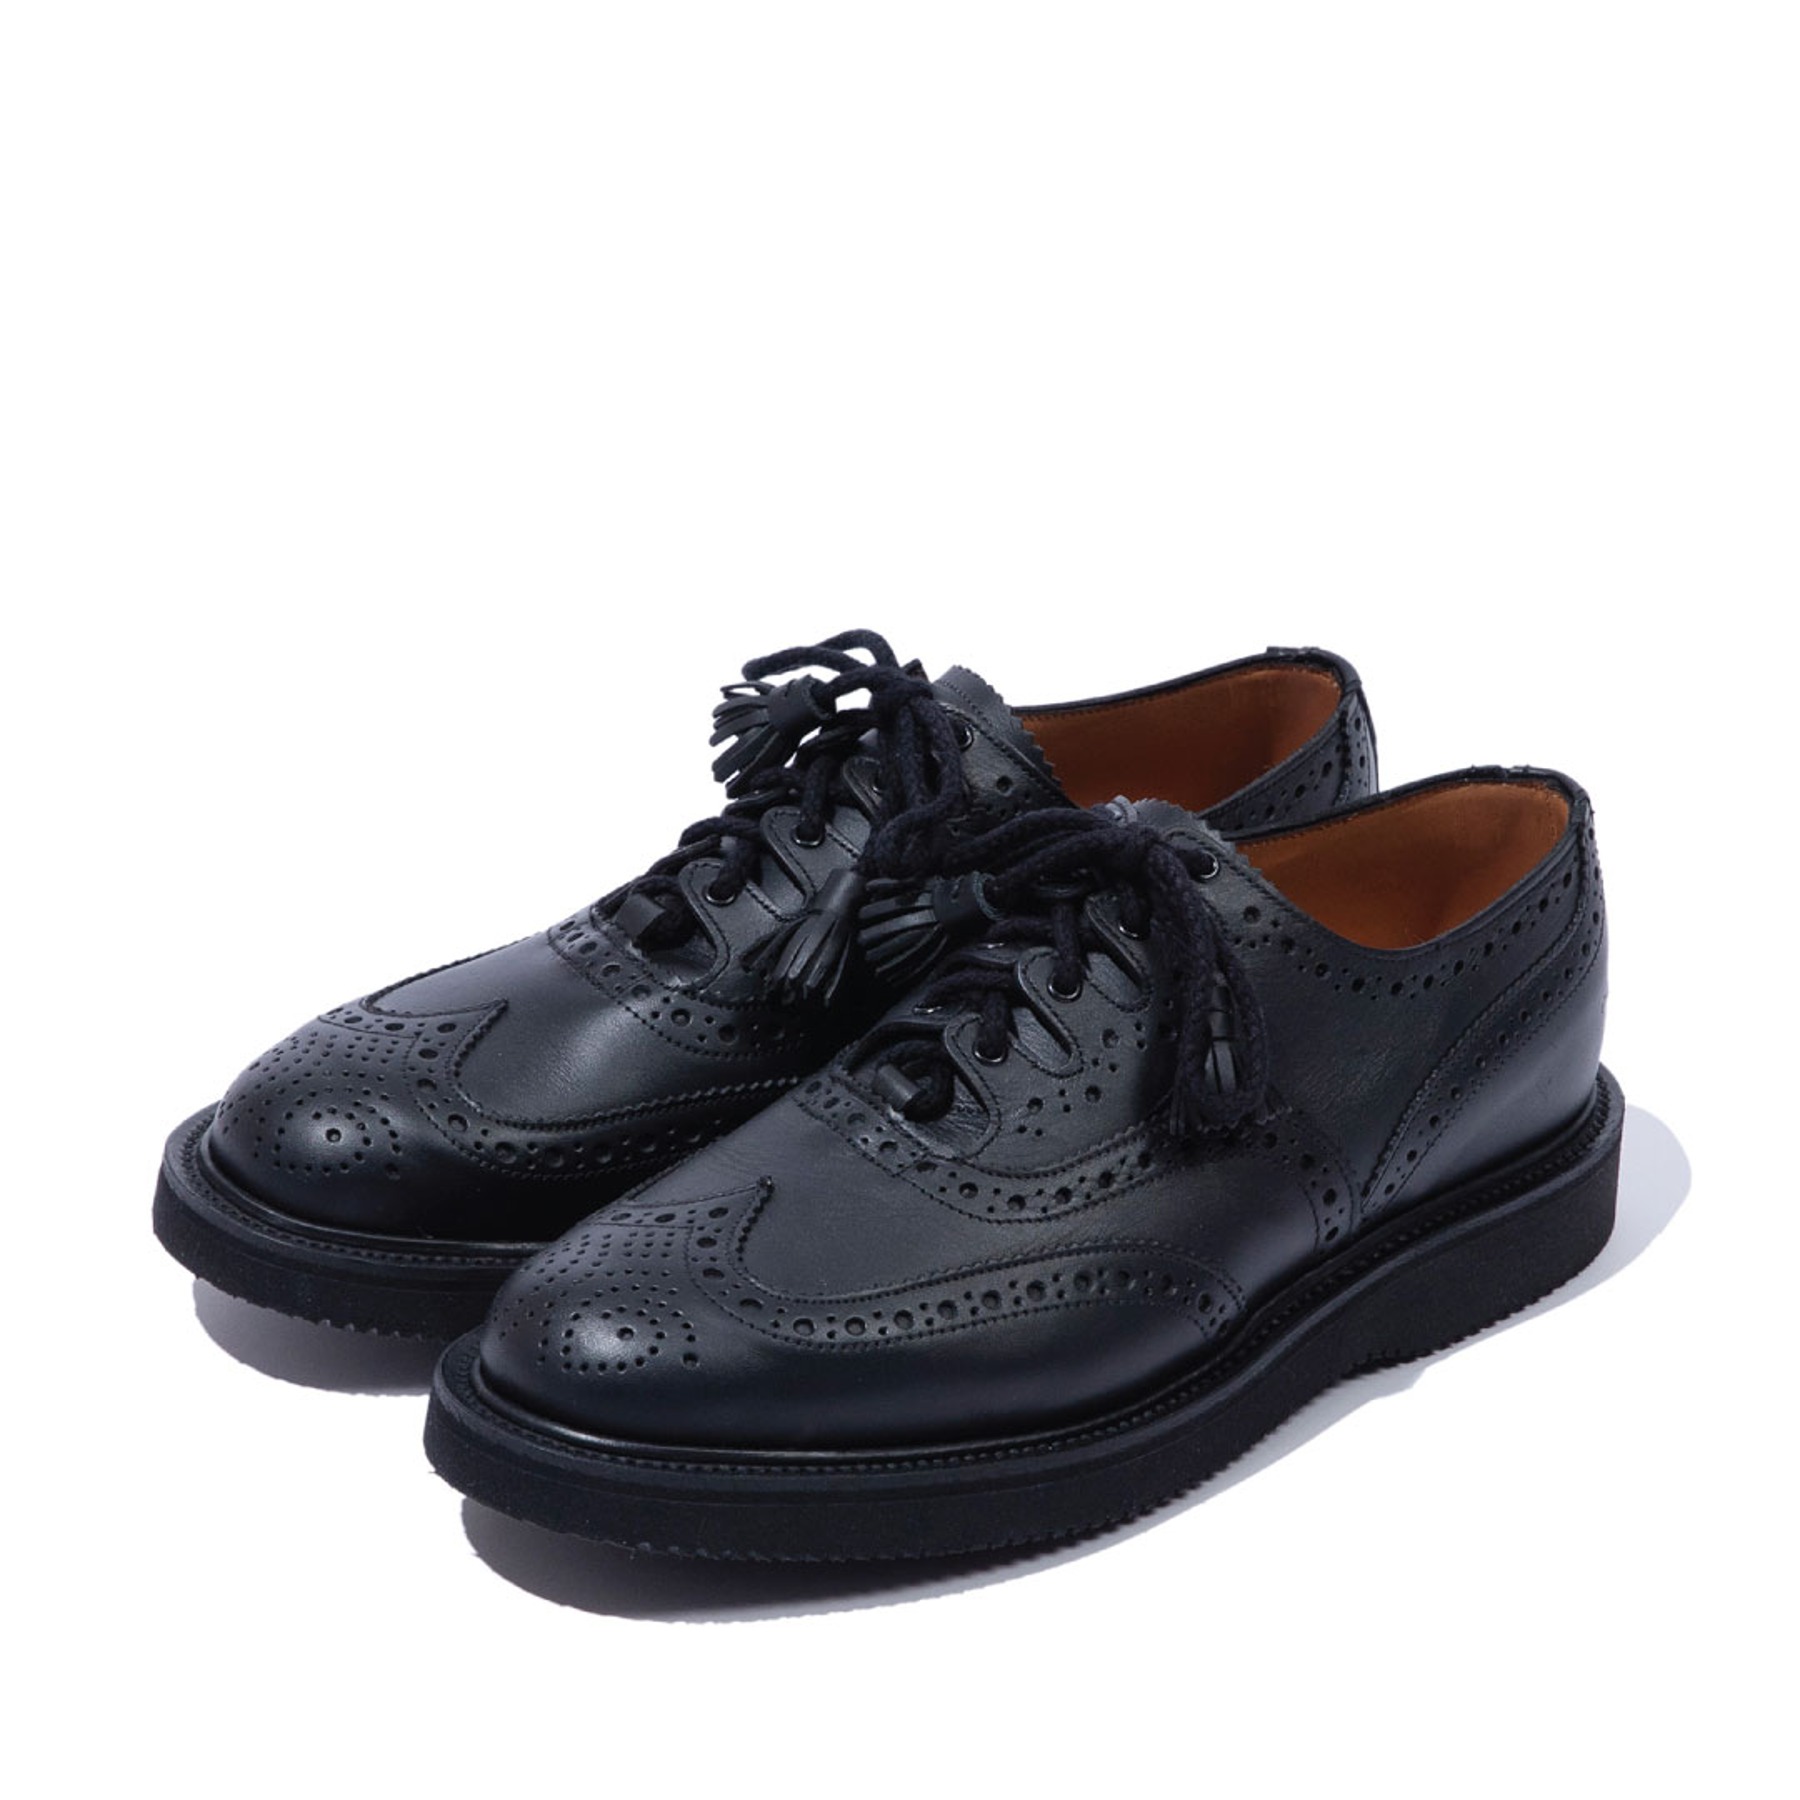 MILITARY GHILLIE SHOES - BLACK WAXY LEATHER with VIBRAM